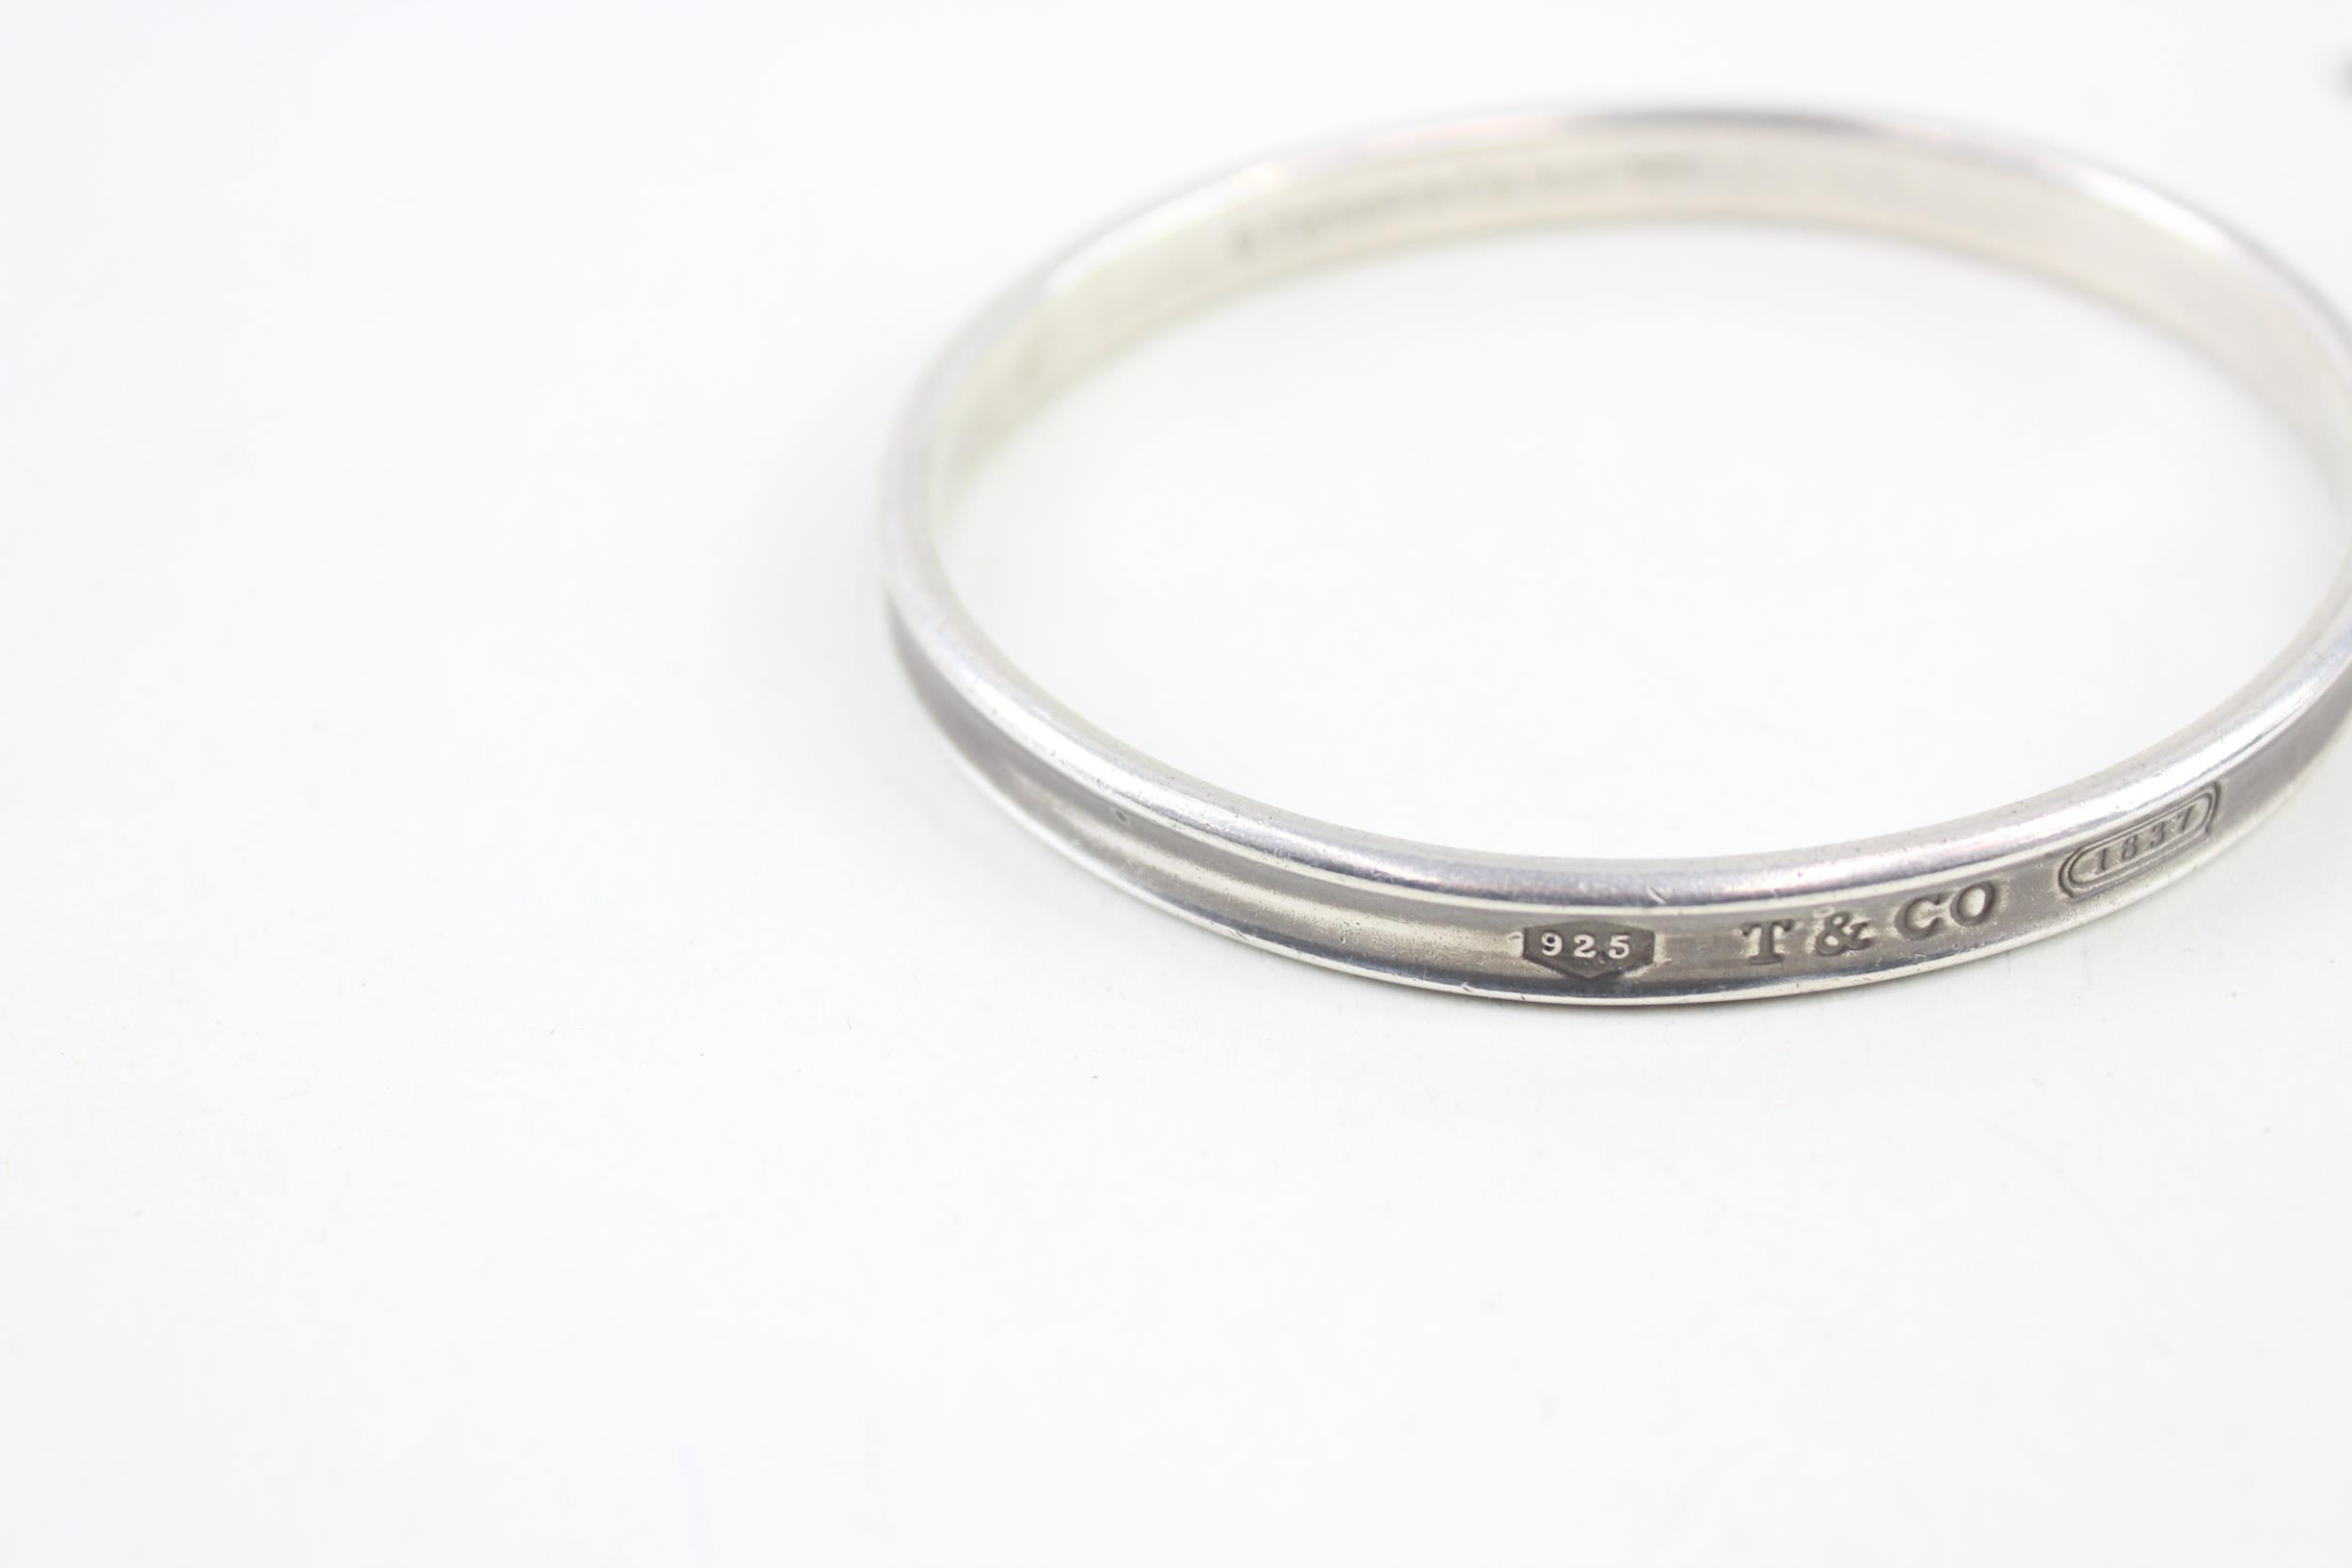 Silver bangle by designer Tiffany & Co (32g) - Image 8 of 12